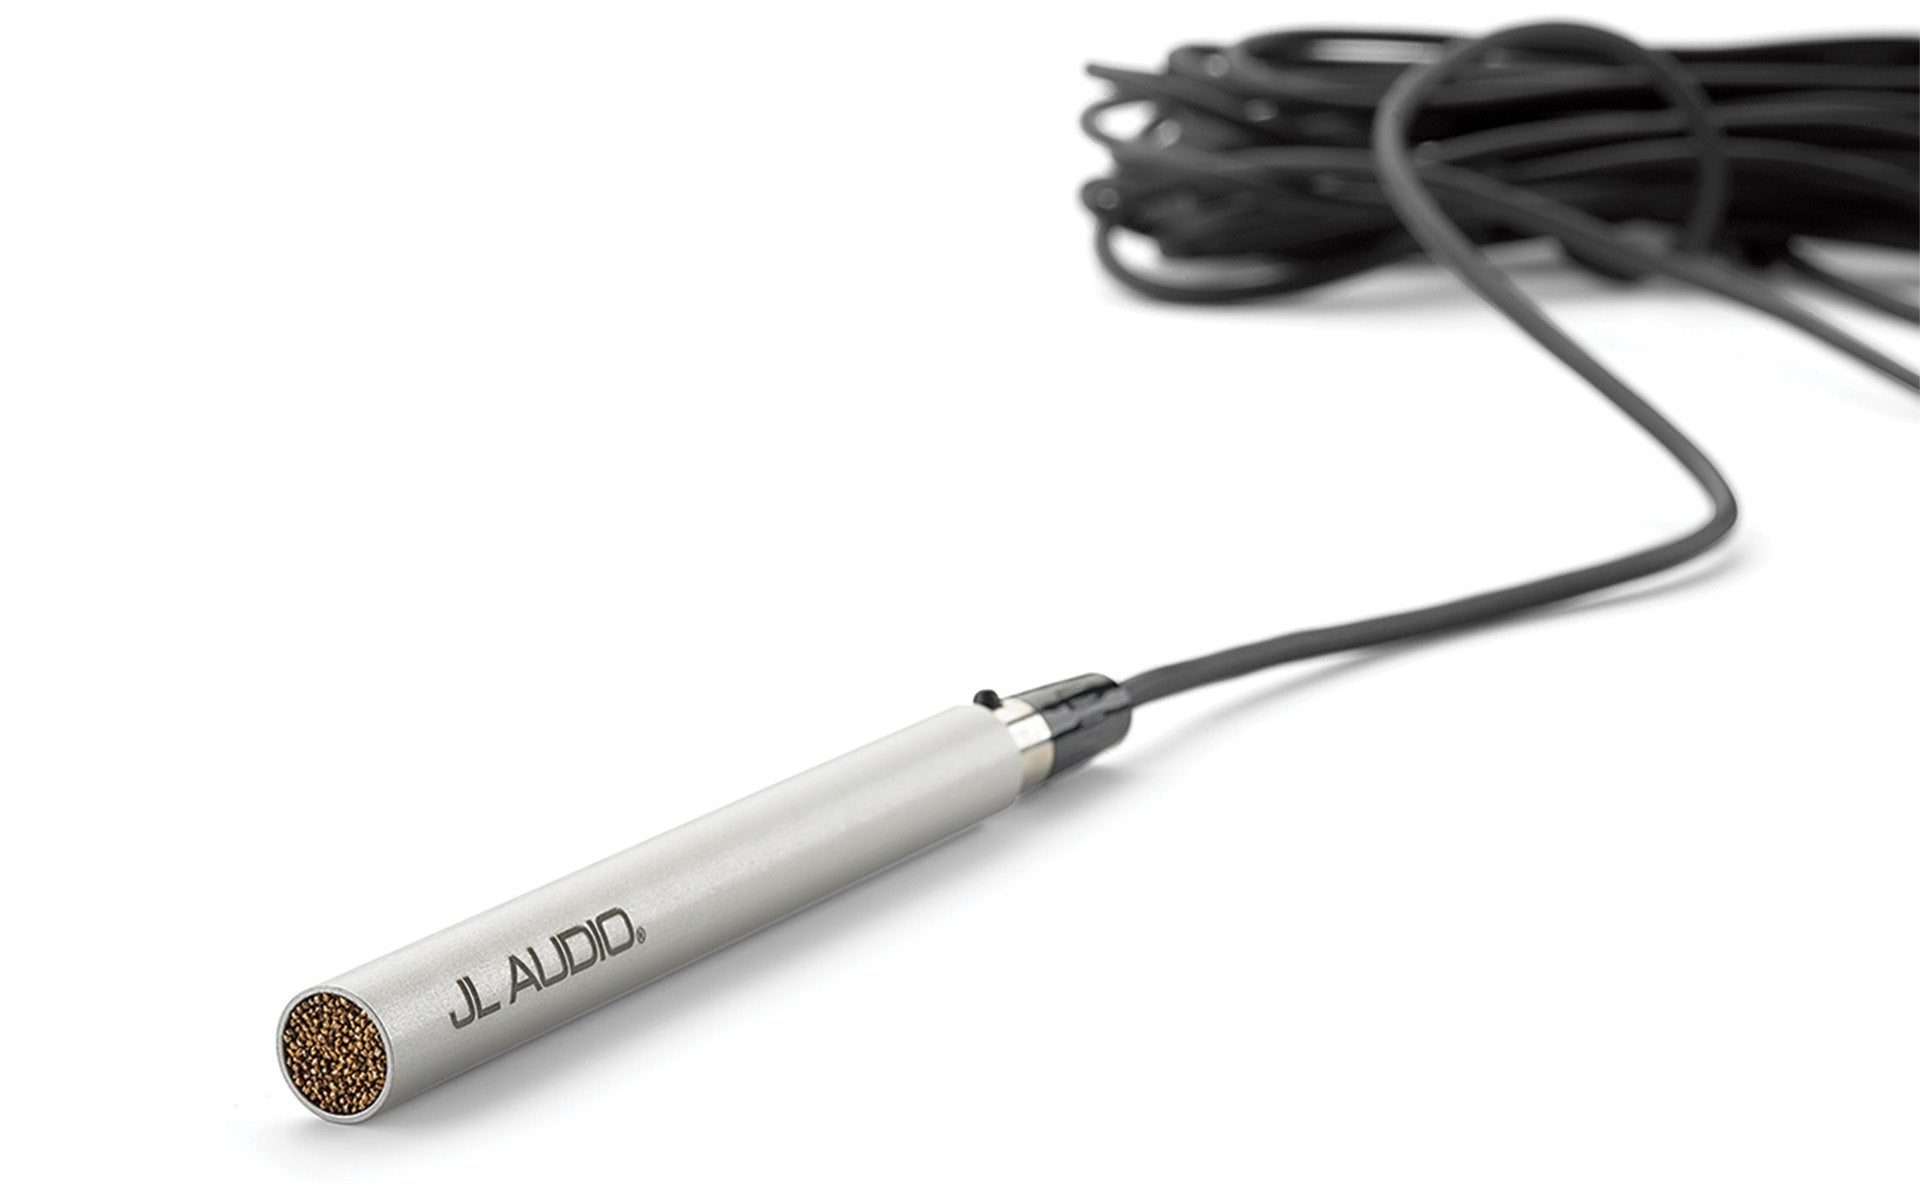 An image of the calibration mic used for the DARO technology.